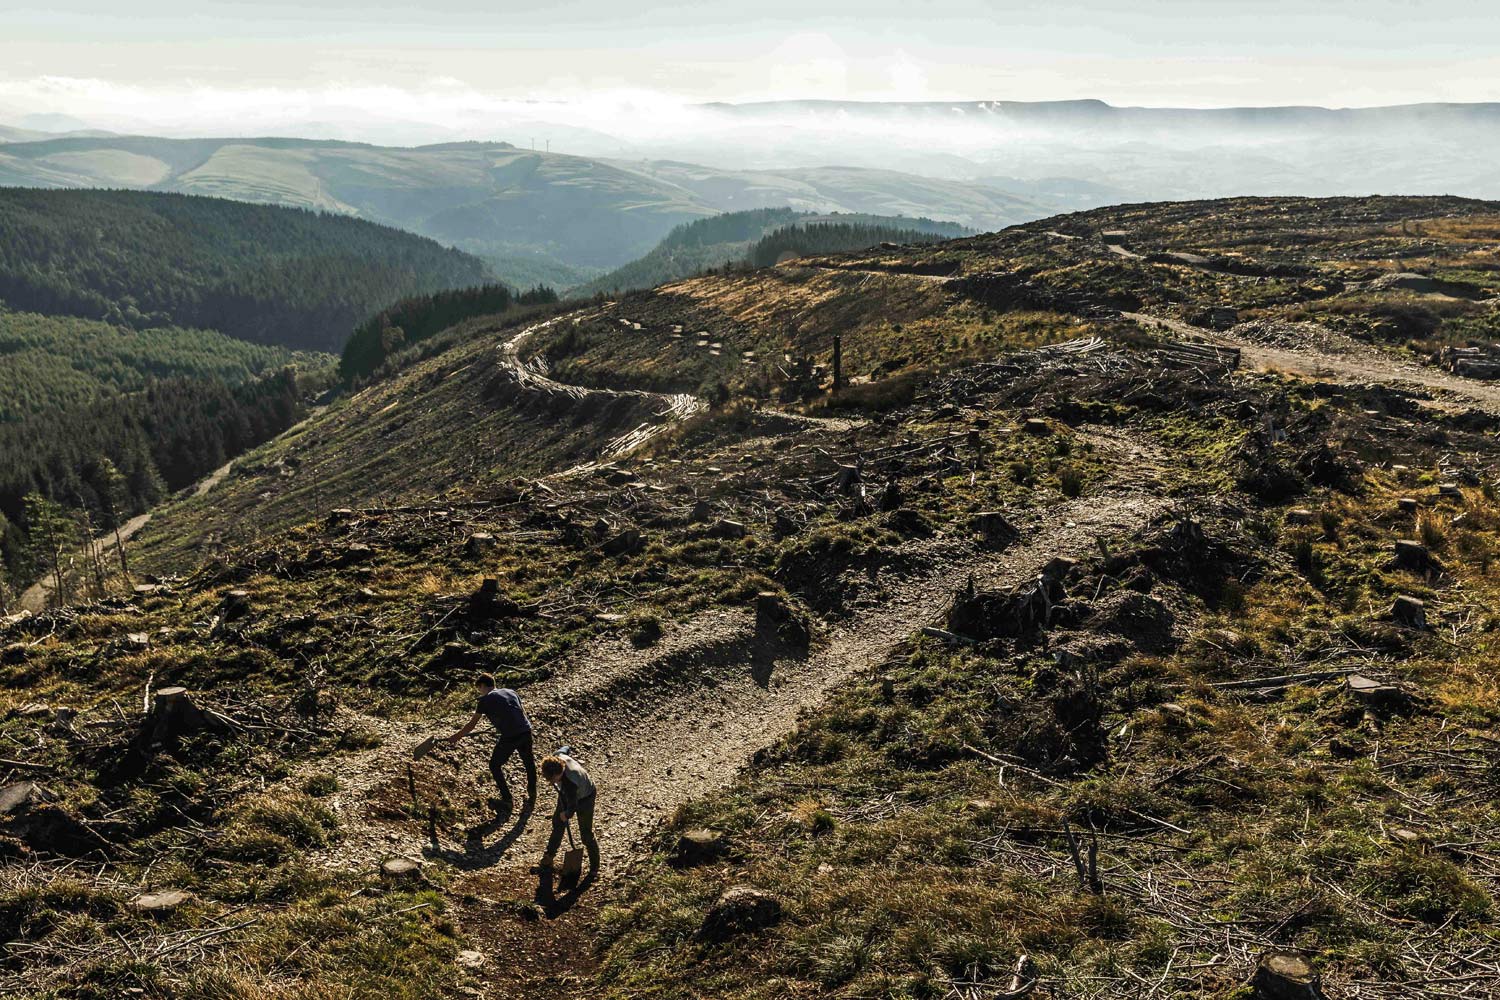 Athertons invite you to ride Dyfi Bike Park in Wales